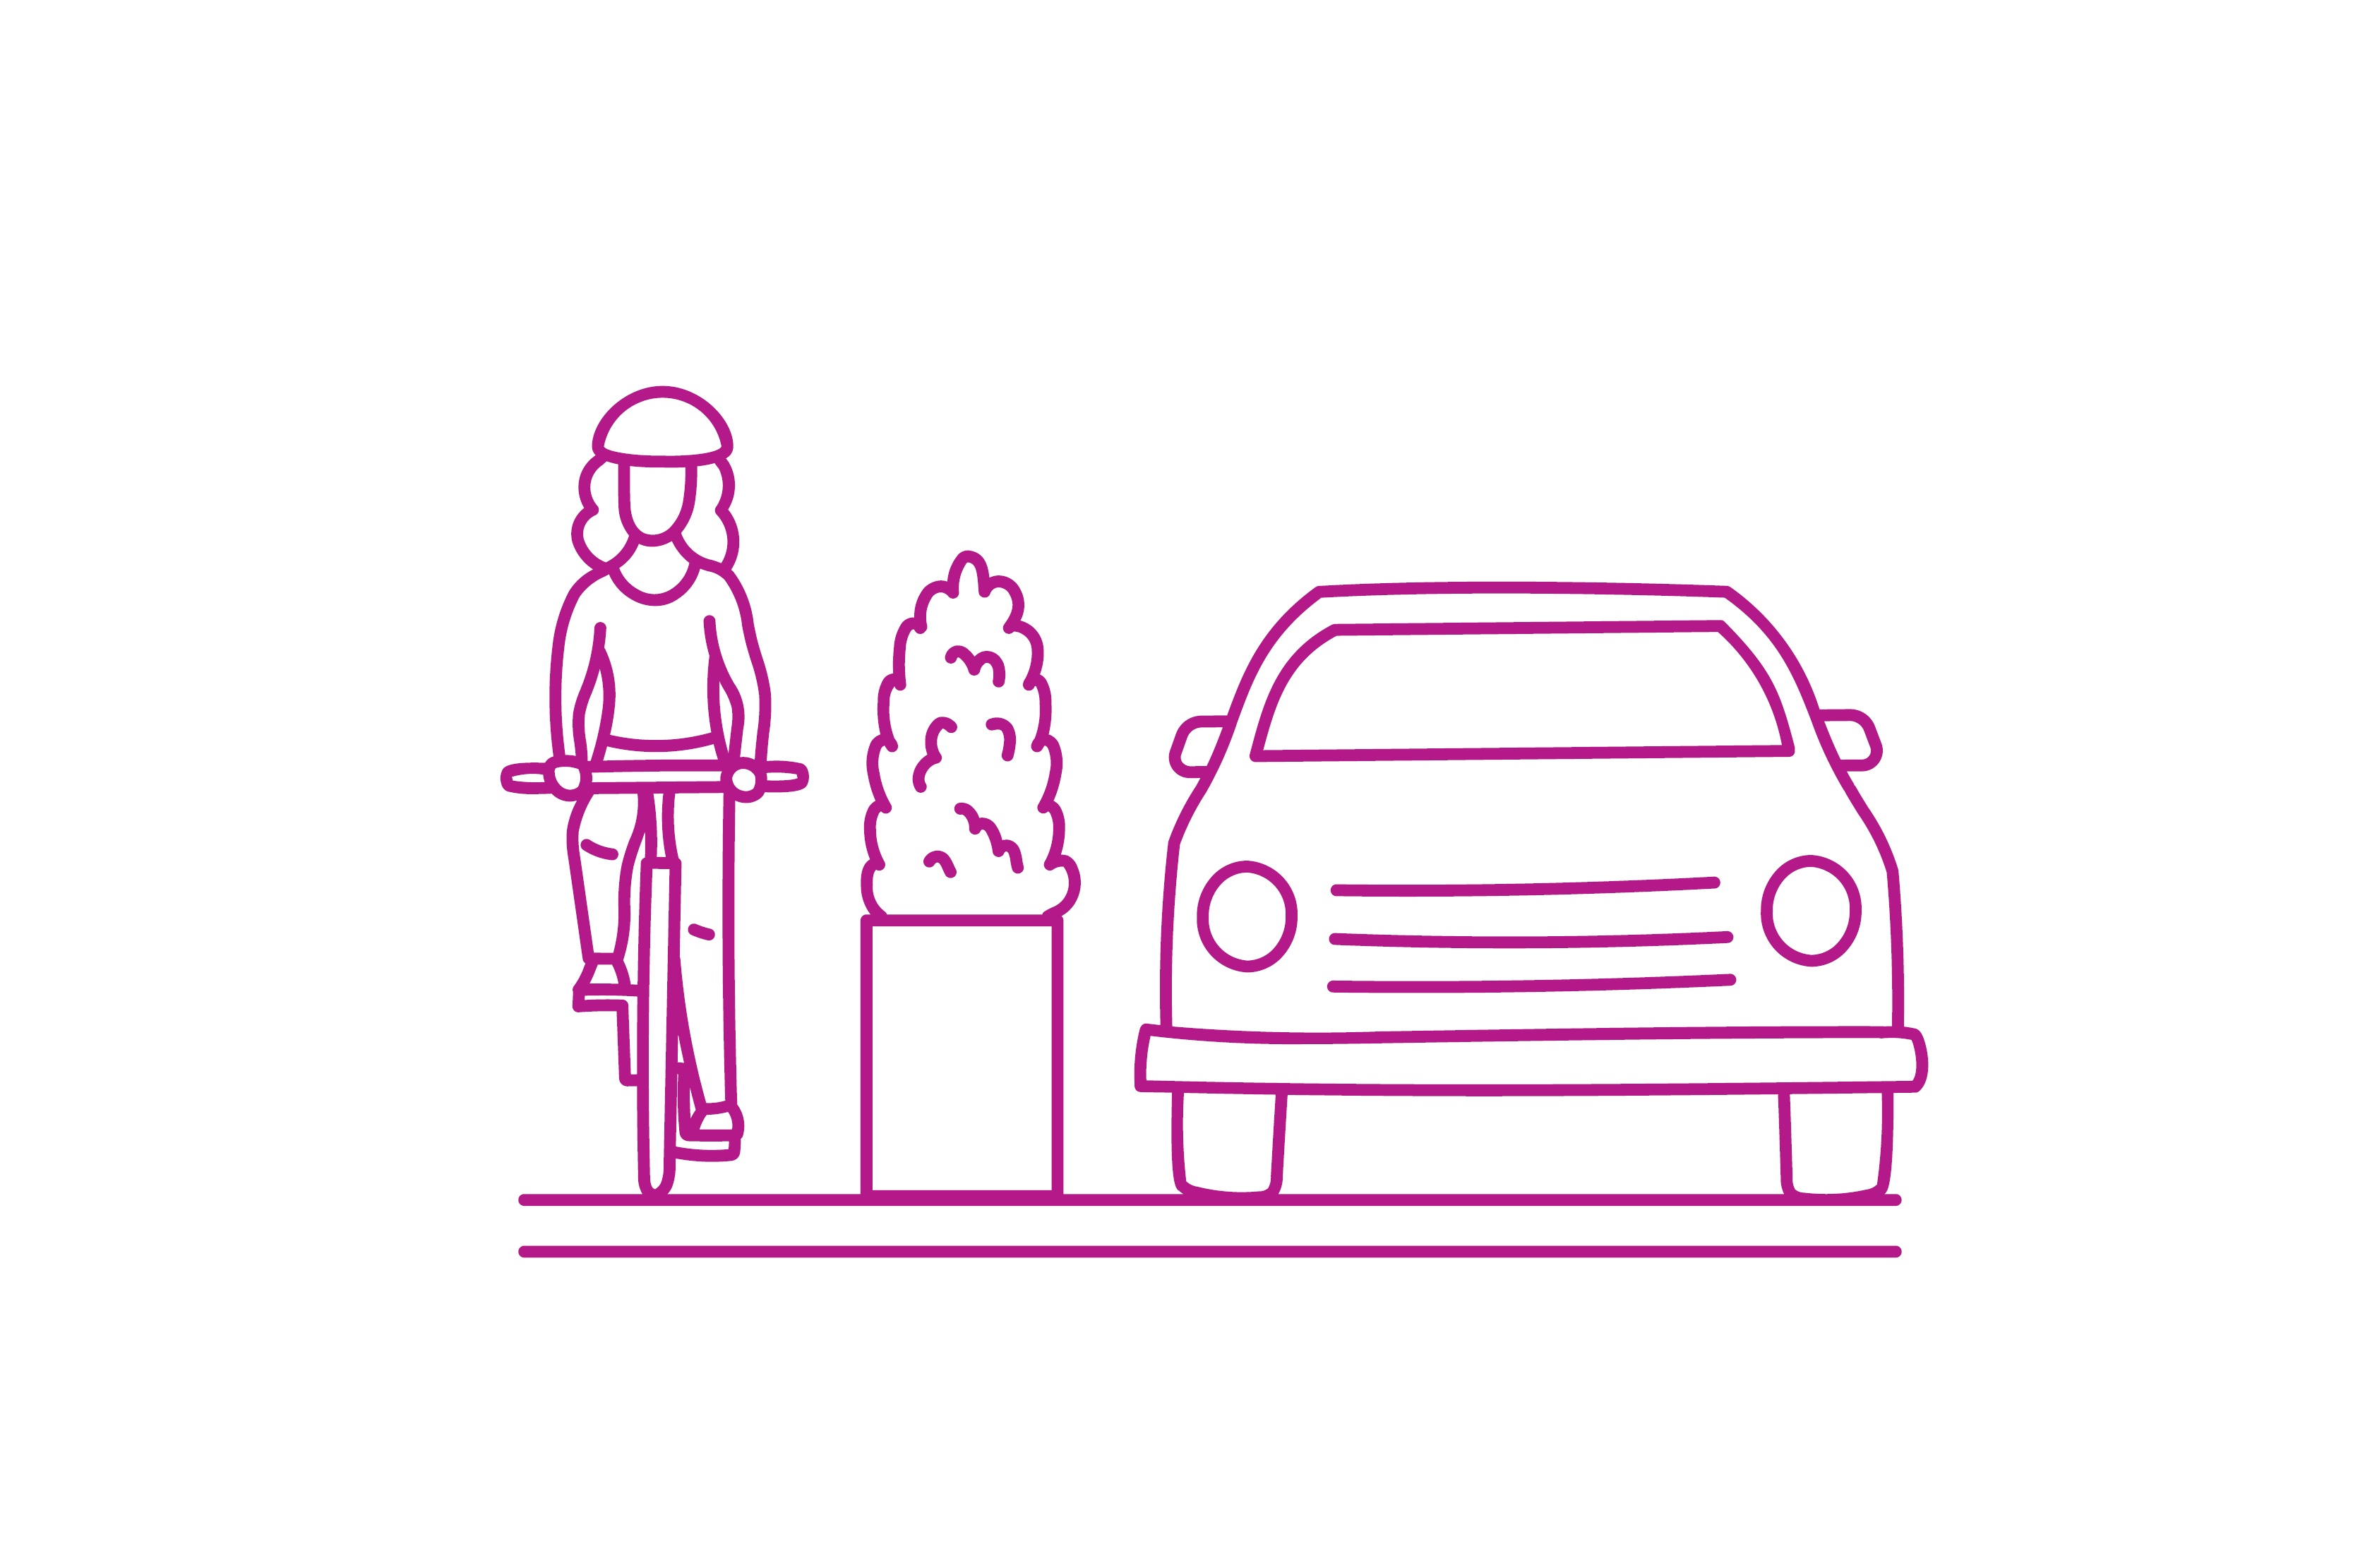 An icon of a woman cycling in a bike lane separated by a row of planters. A car is on the other side.